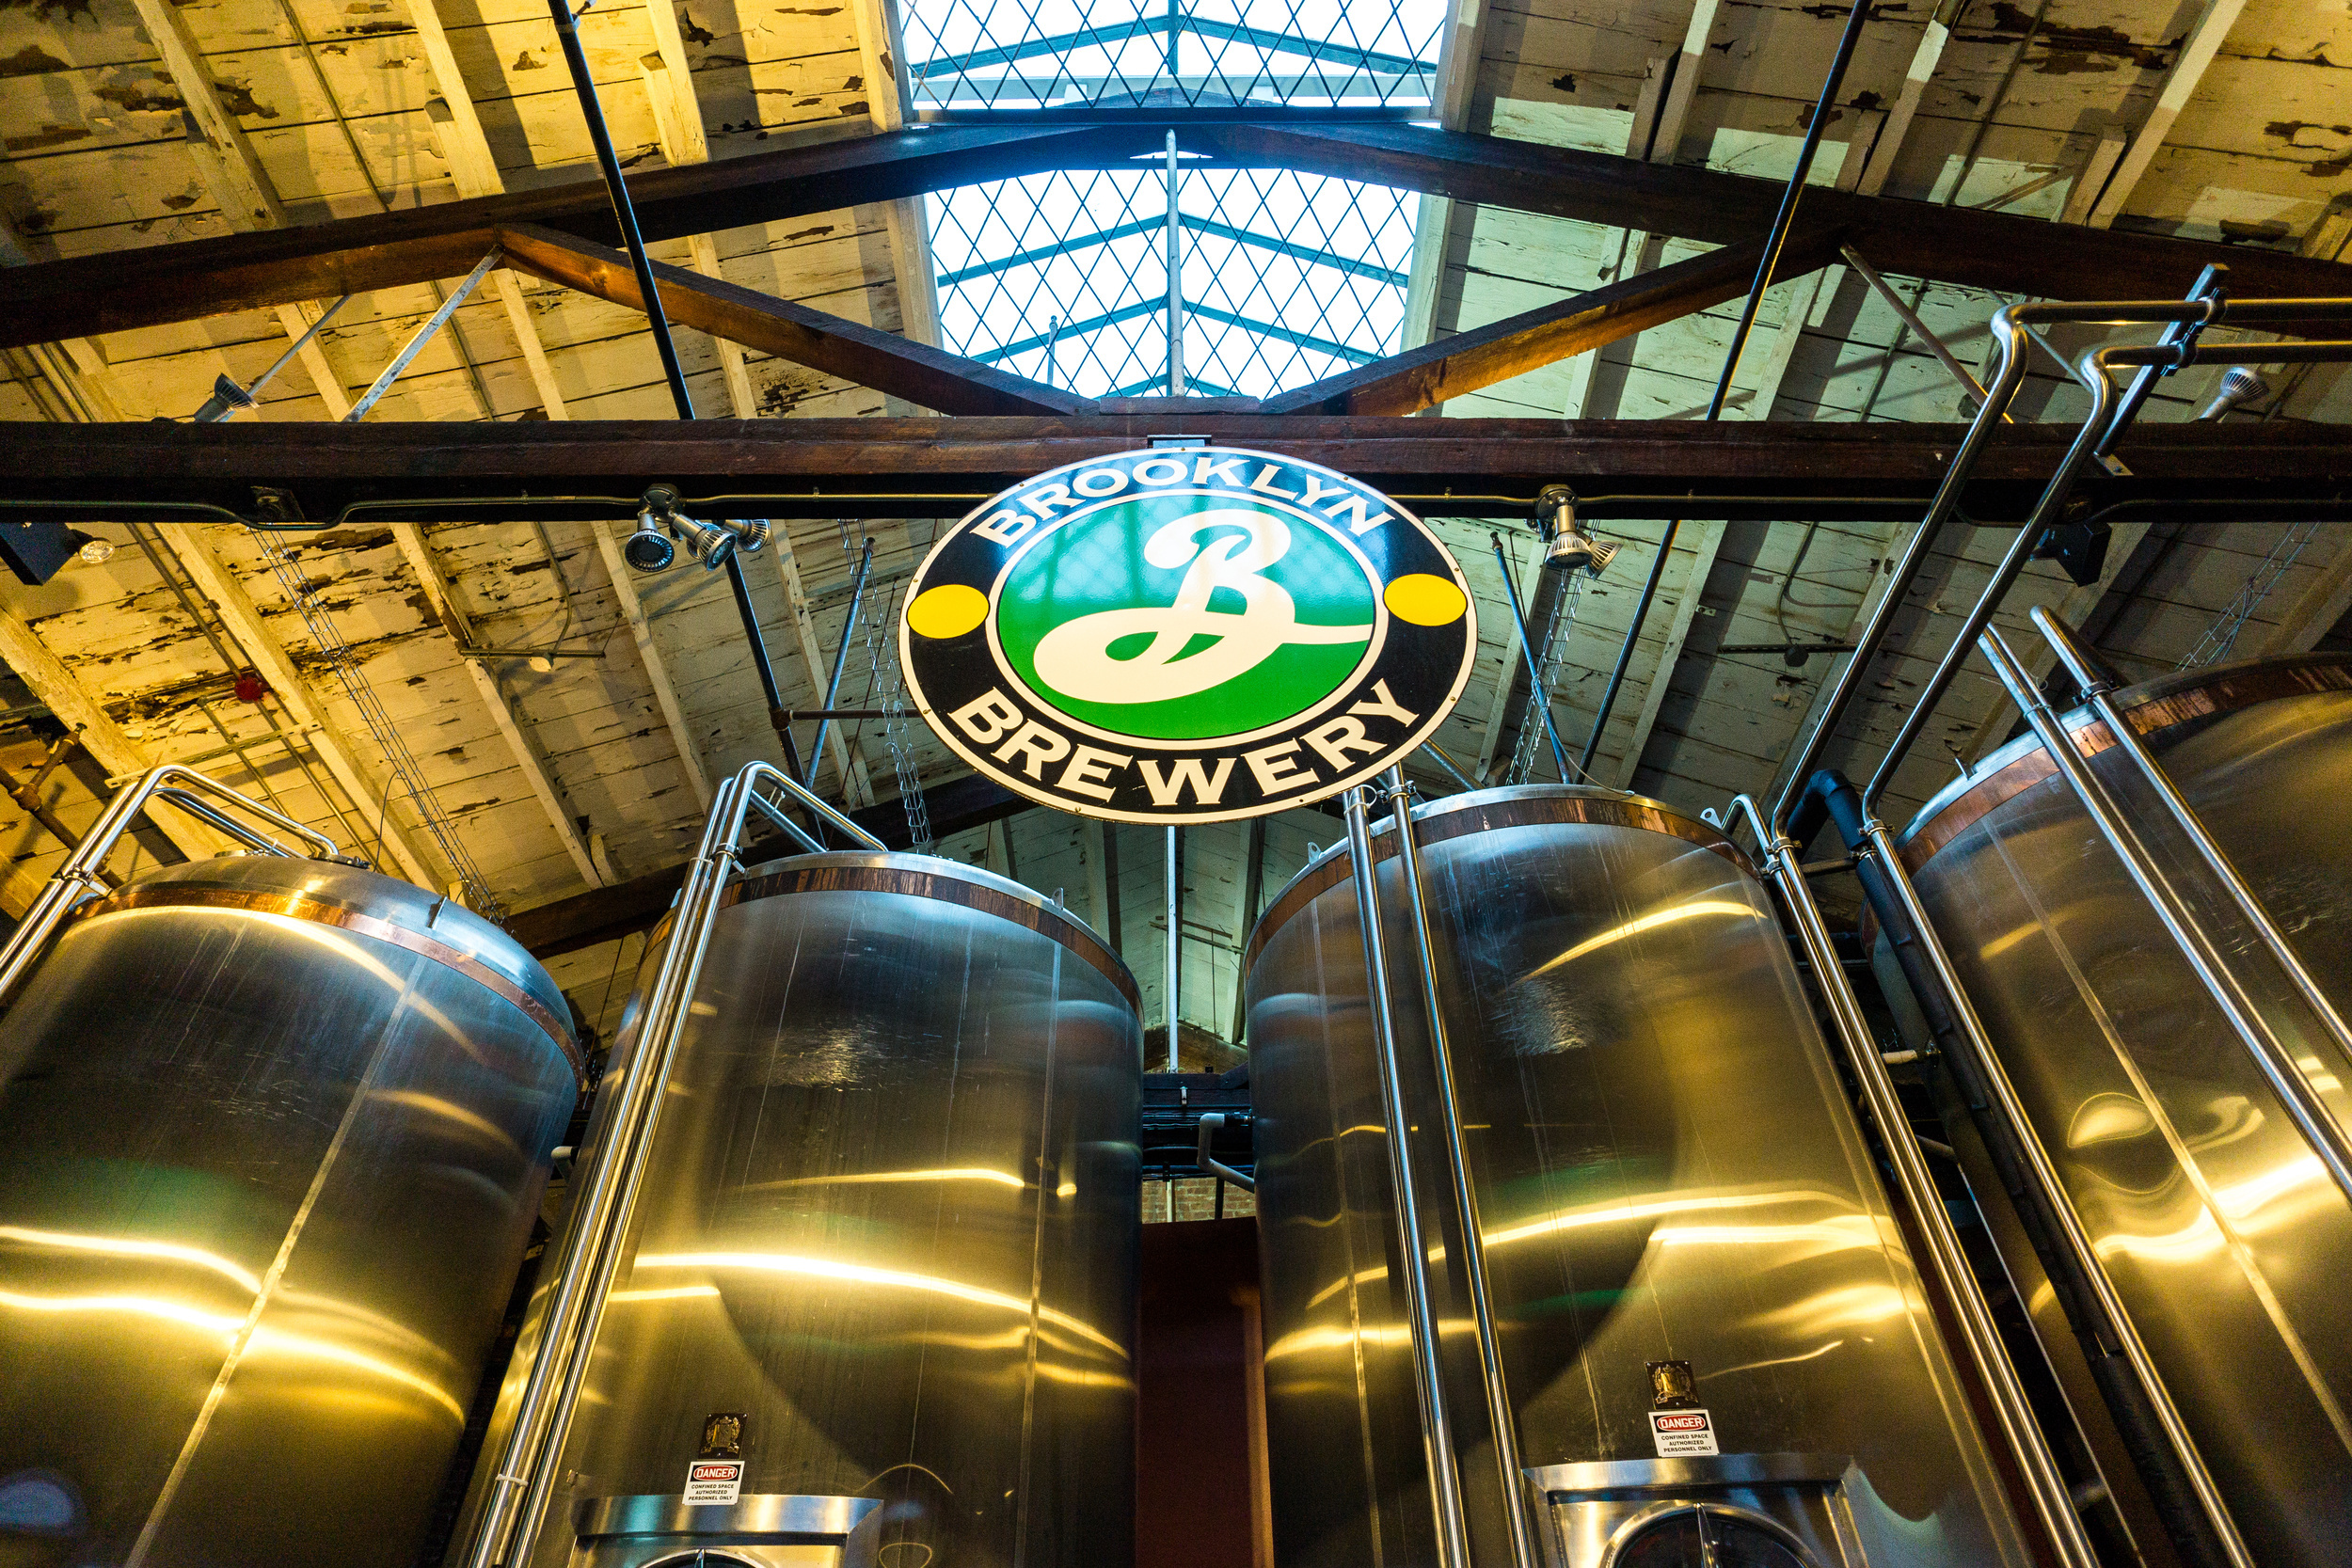 <p>Nestled in the confines of its namesake New York borough, Brooklyn Brewery has become not just a national brand but one that sees its beer in more than 30 countries. Its brewmaster, Garrett Oliver, is a James Beard award winner, which explains its tremendous success. Brooklyn isn't short of things to do and places to visit, but no trip to the area is complete for a beer lover without stopping by this taproom. </p><p>You may also like: <a href='https://www.yardbarker.com/lifestyle/articles/sizzle_reel_21_recipes_that_include_bacon_032124/s1__37848458'>Sizzle reel: 21 recipes that include bacon</a></p>